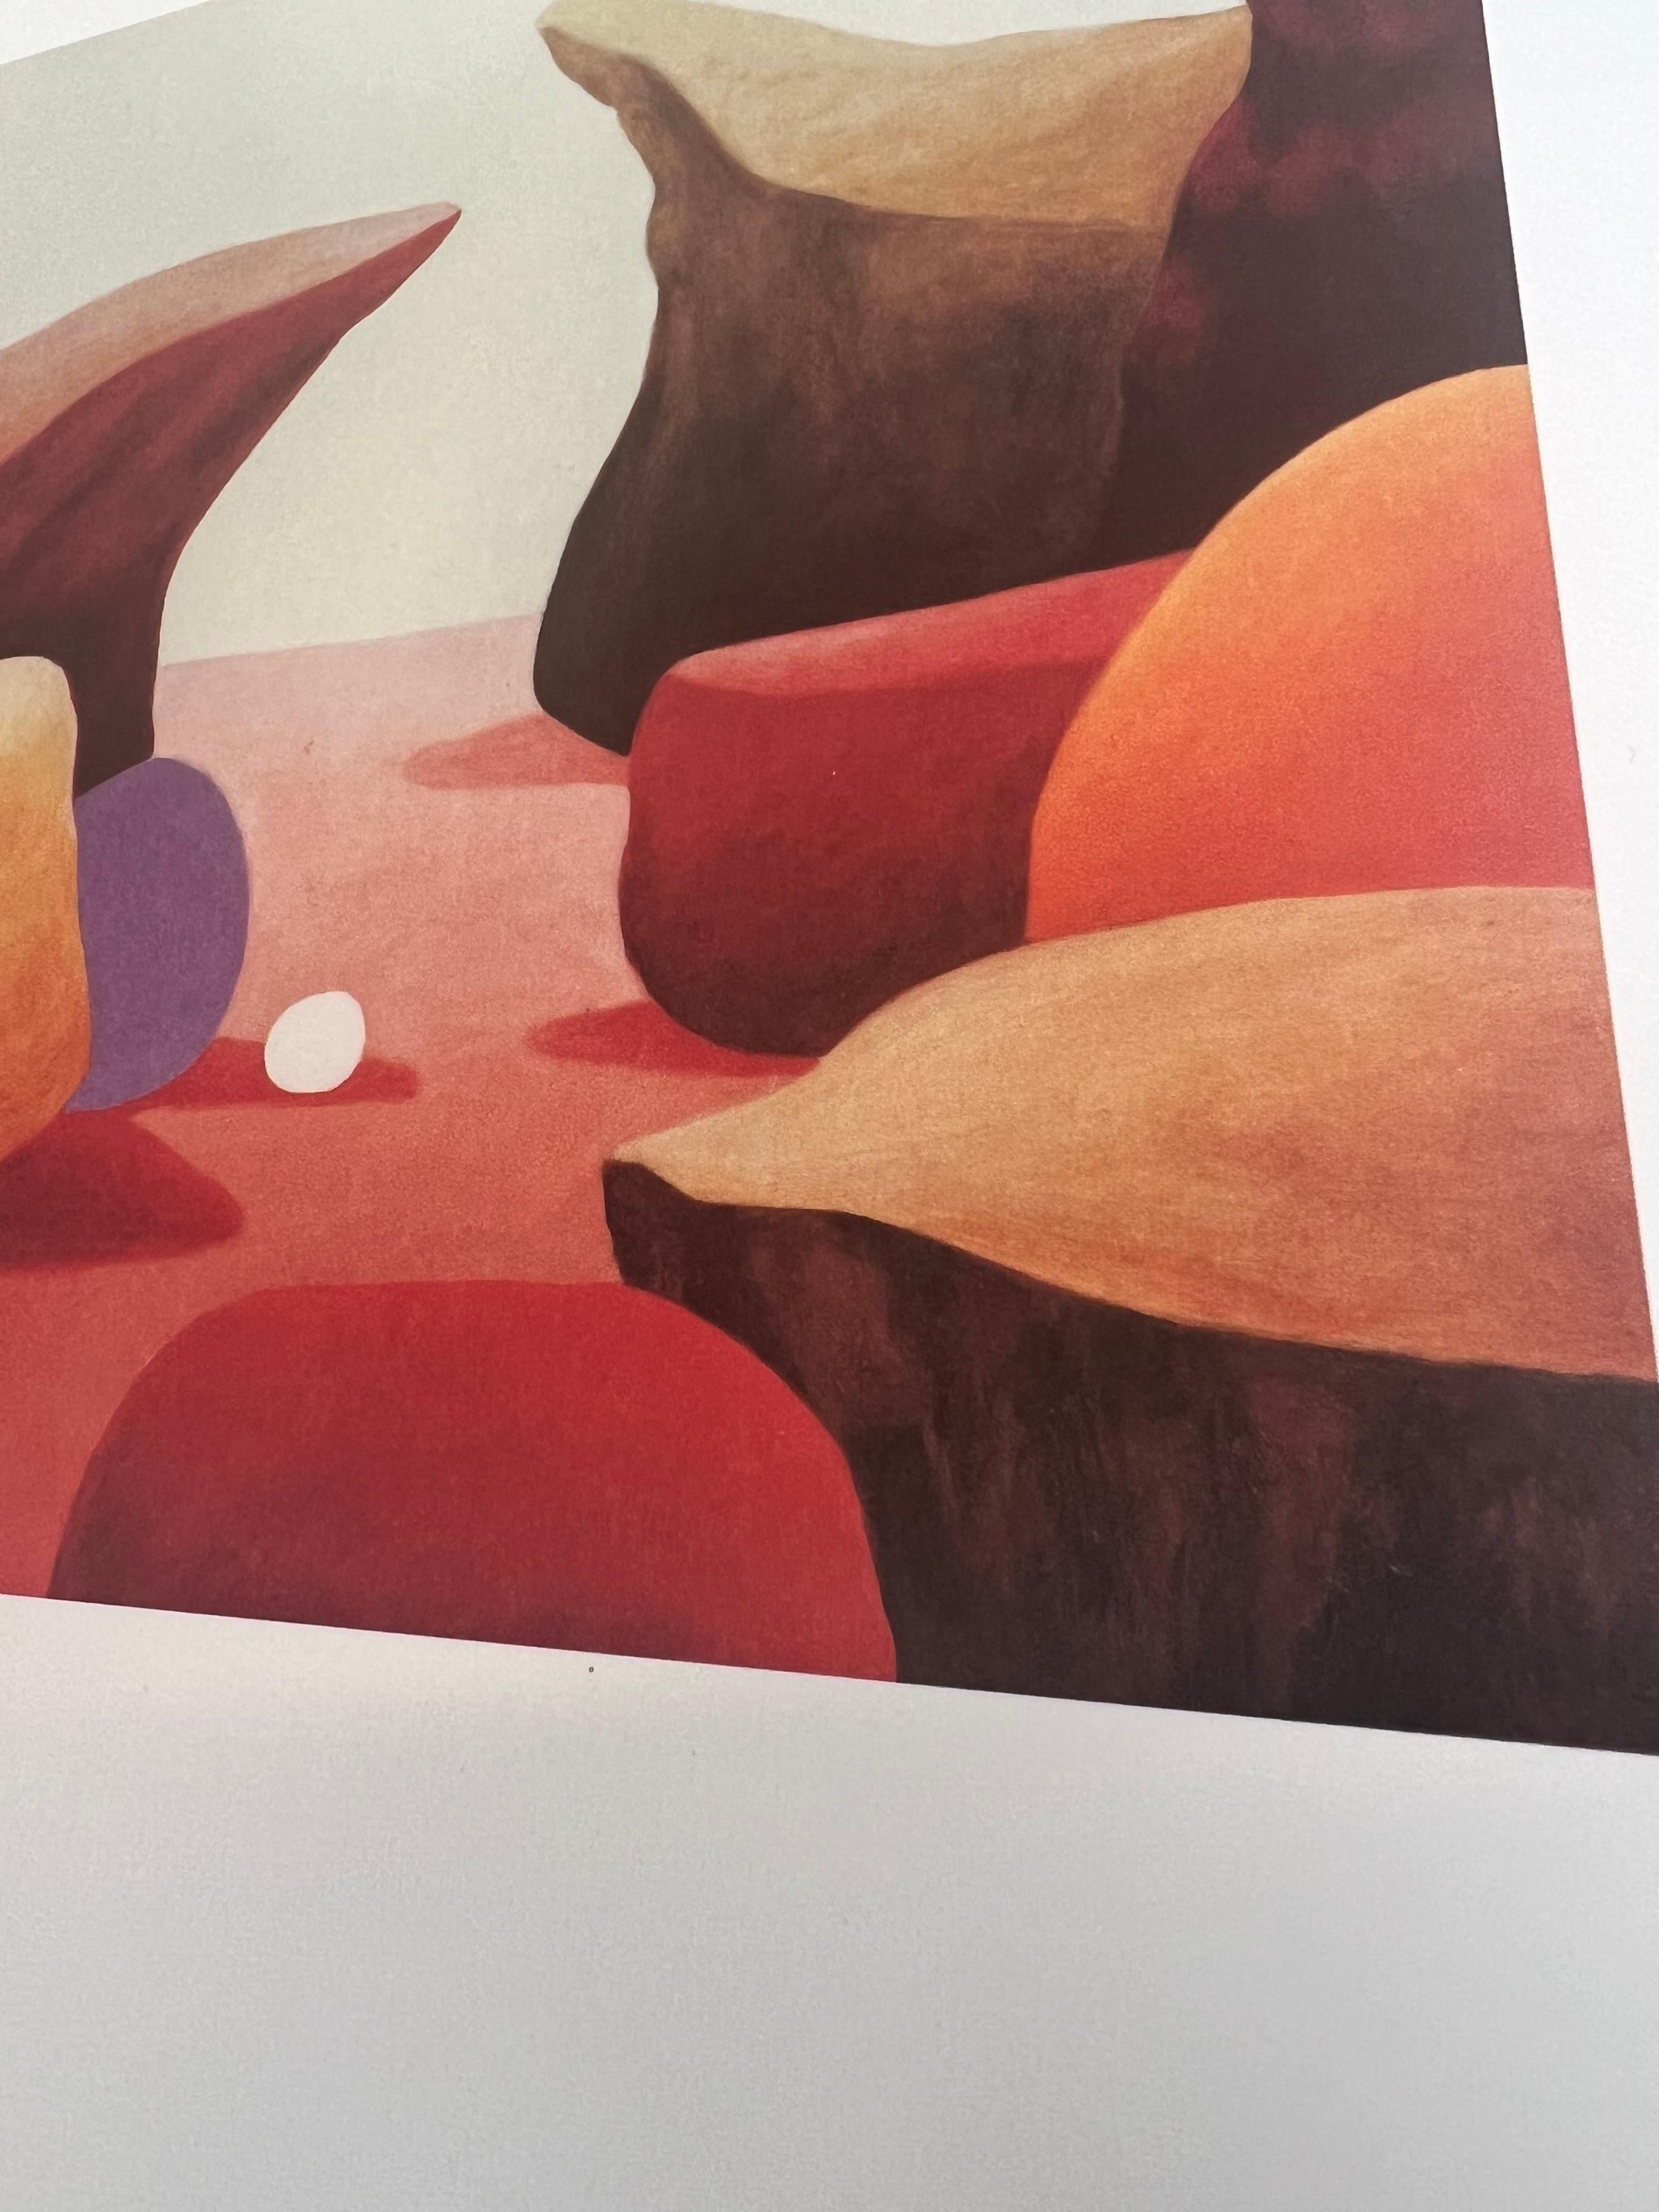 NICOLAS PARTY
STILL LIFE (ROCKS), 2023
4 Colour offset print on thick matte paper.
30 × 30 cm
Edition of 100

Produced by MUSEUM FRIEDER BURDA.